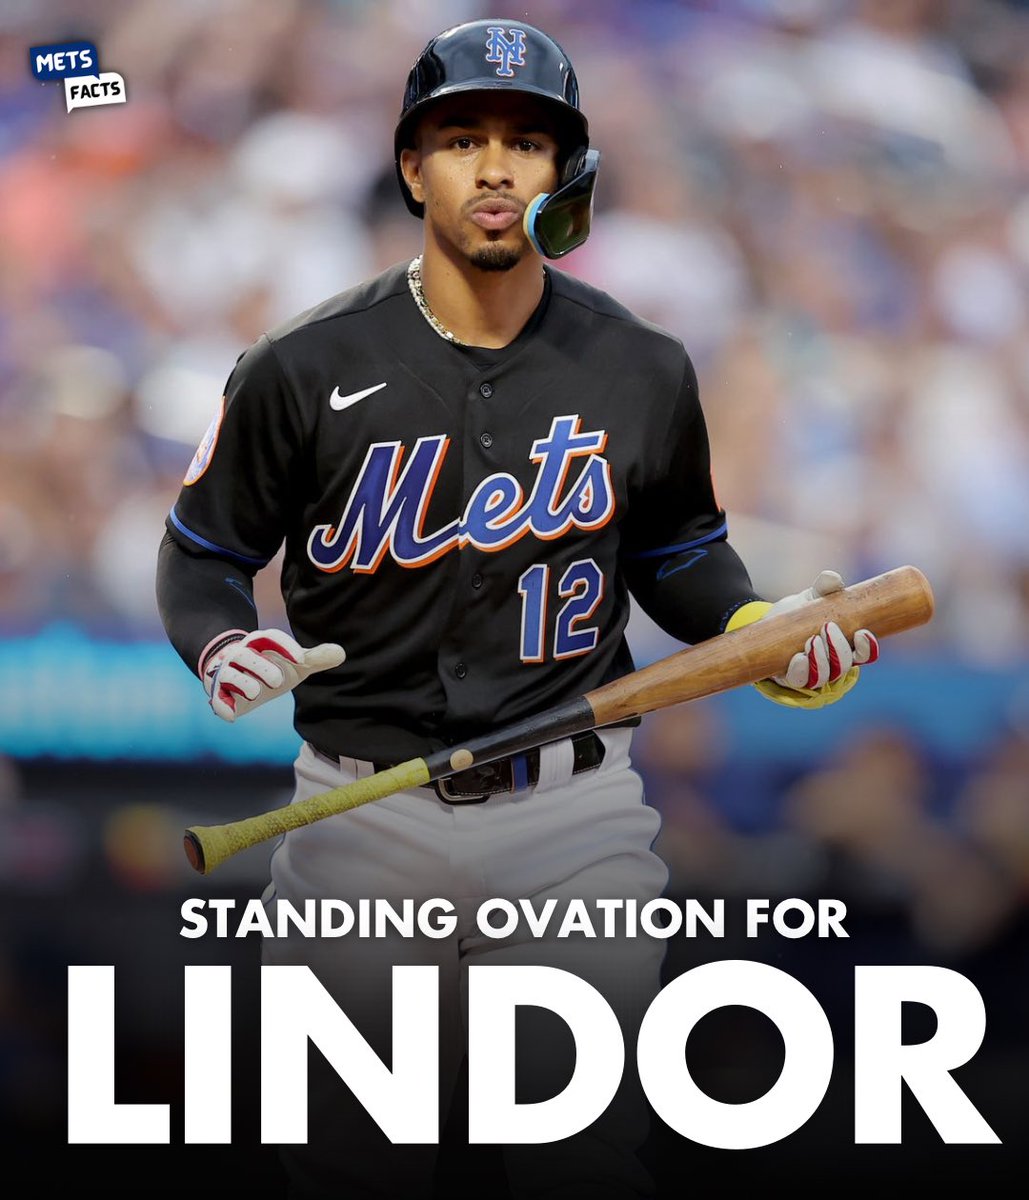 Tonight is the night! Make sure everyone knows that we will be giving a standing ovation to Lindor! Feel free to give everyone else a standing ovation as well!